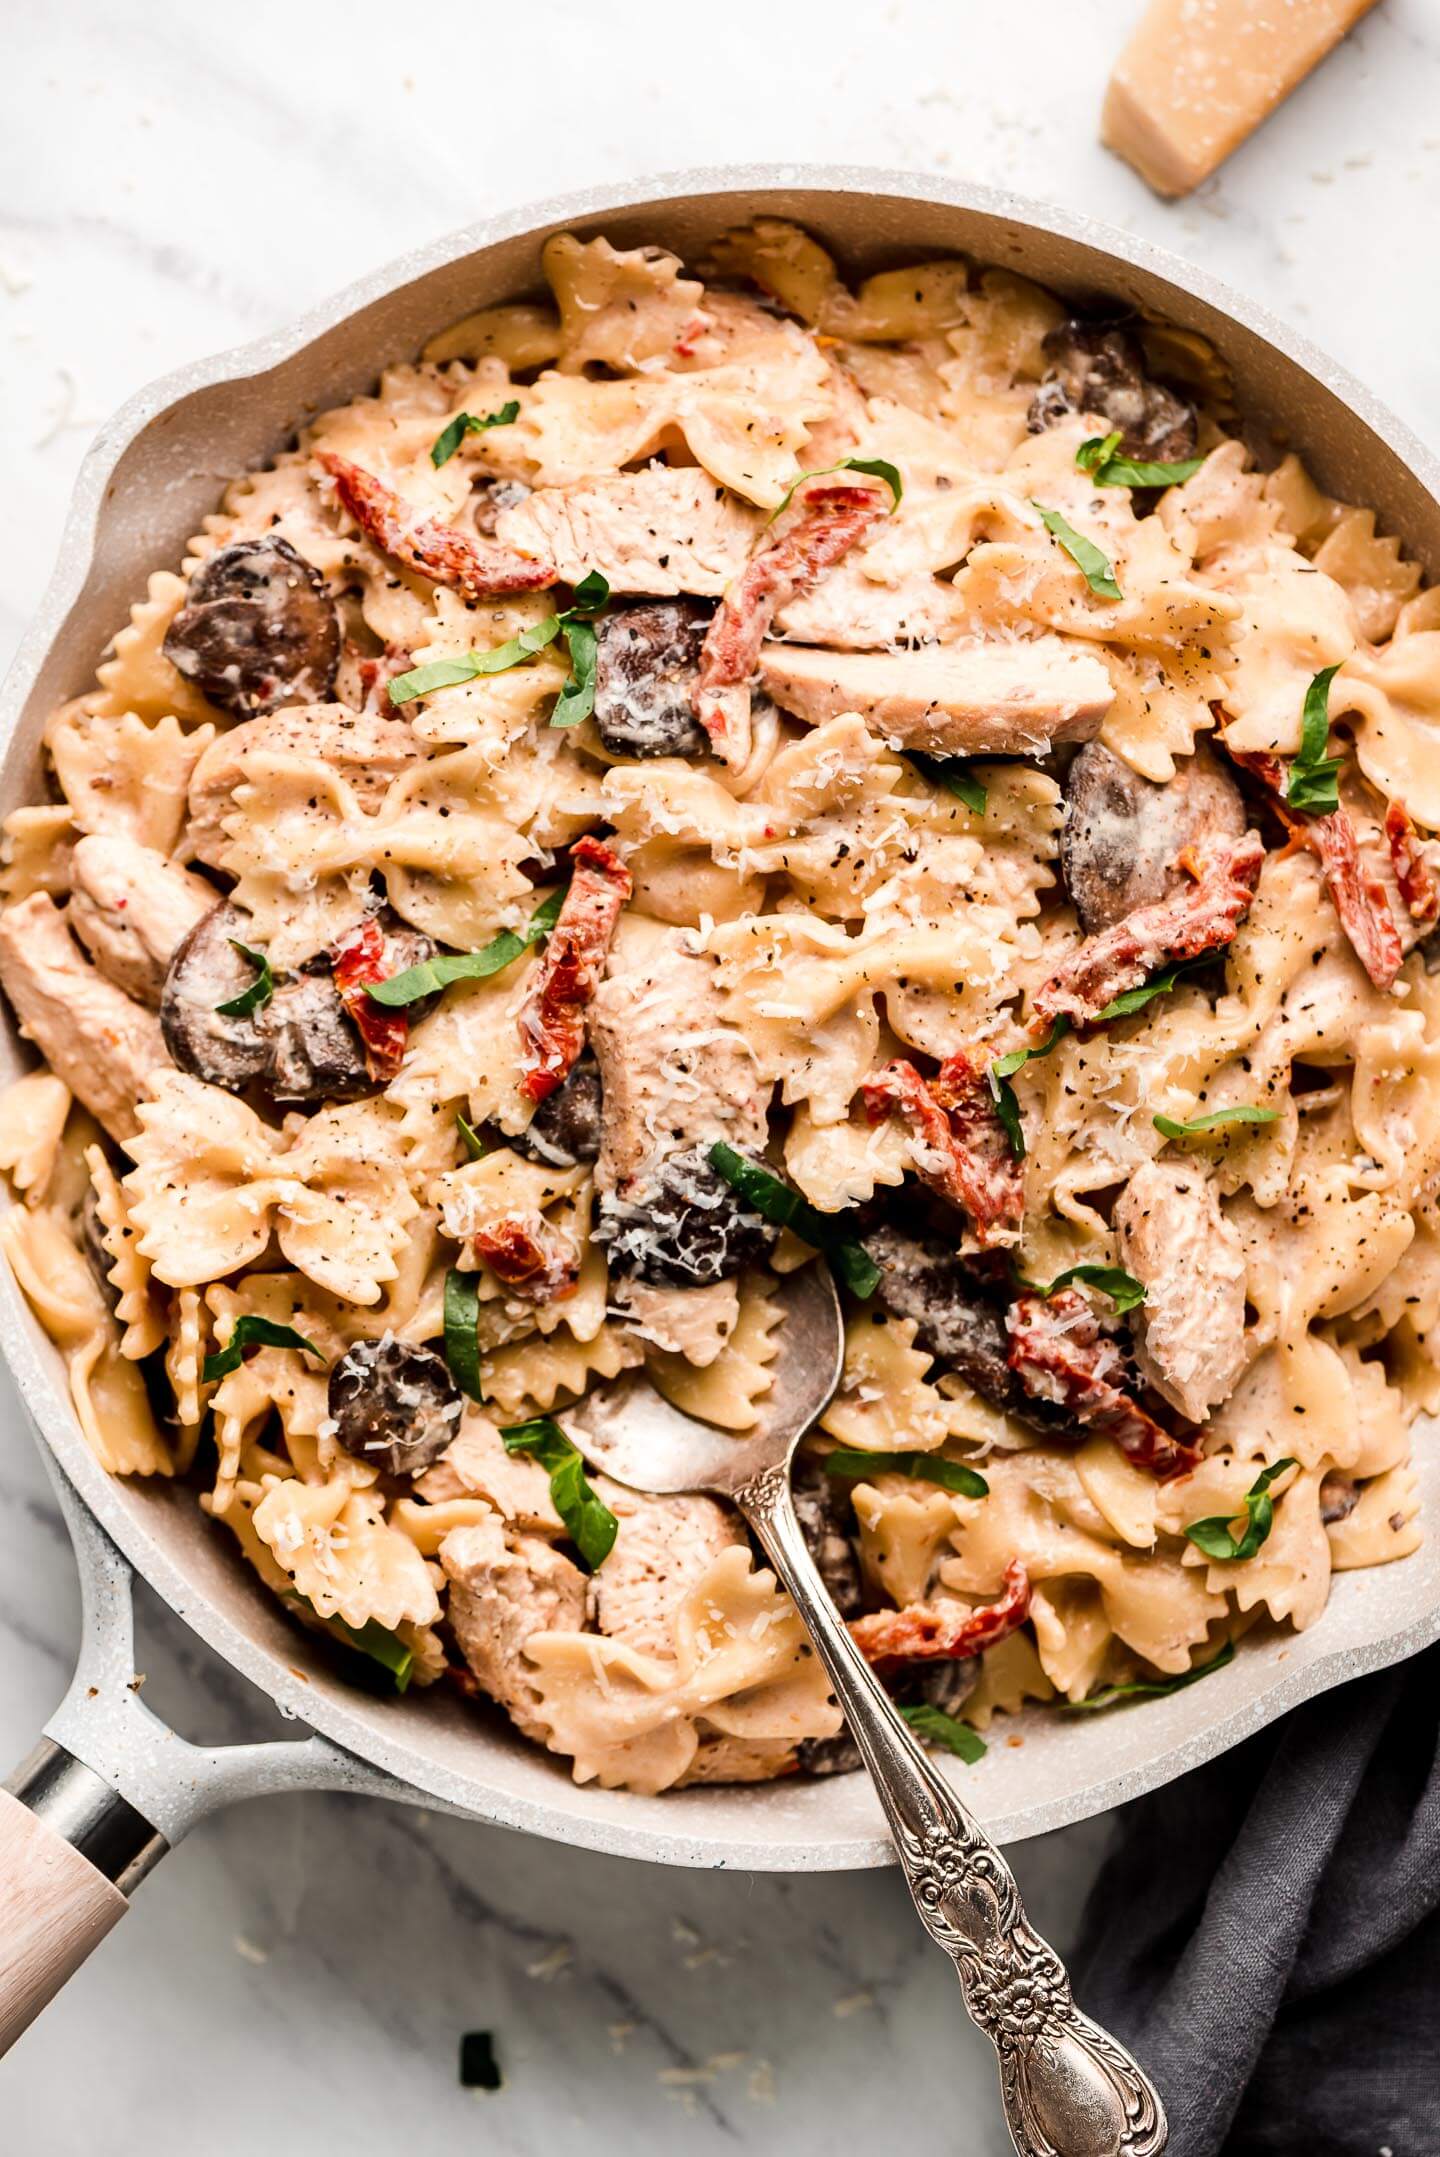 A pan of creamy bow tie pasta with mushrooms, chicken, sun dried tomatoes, basil, and Parmesan cheese.